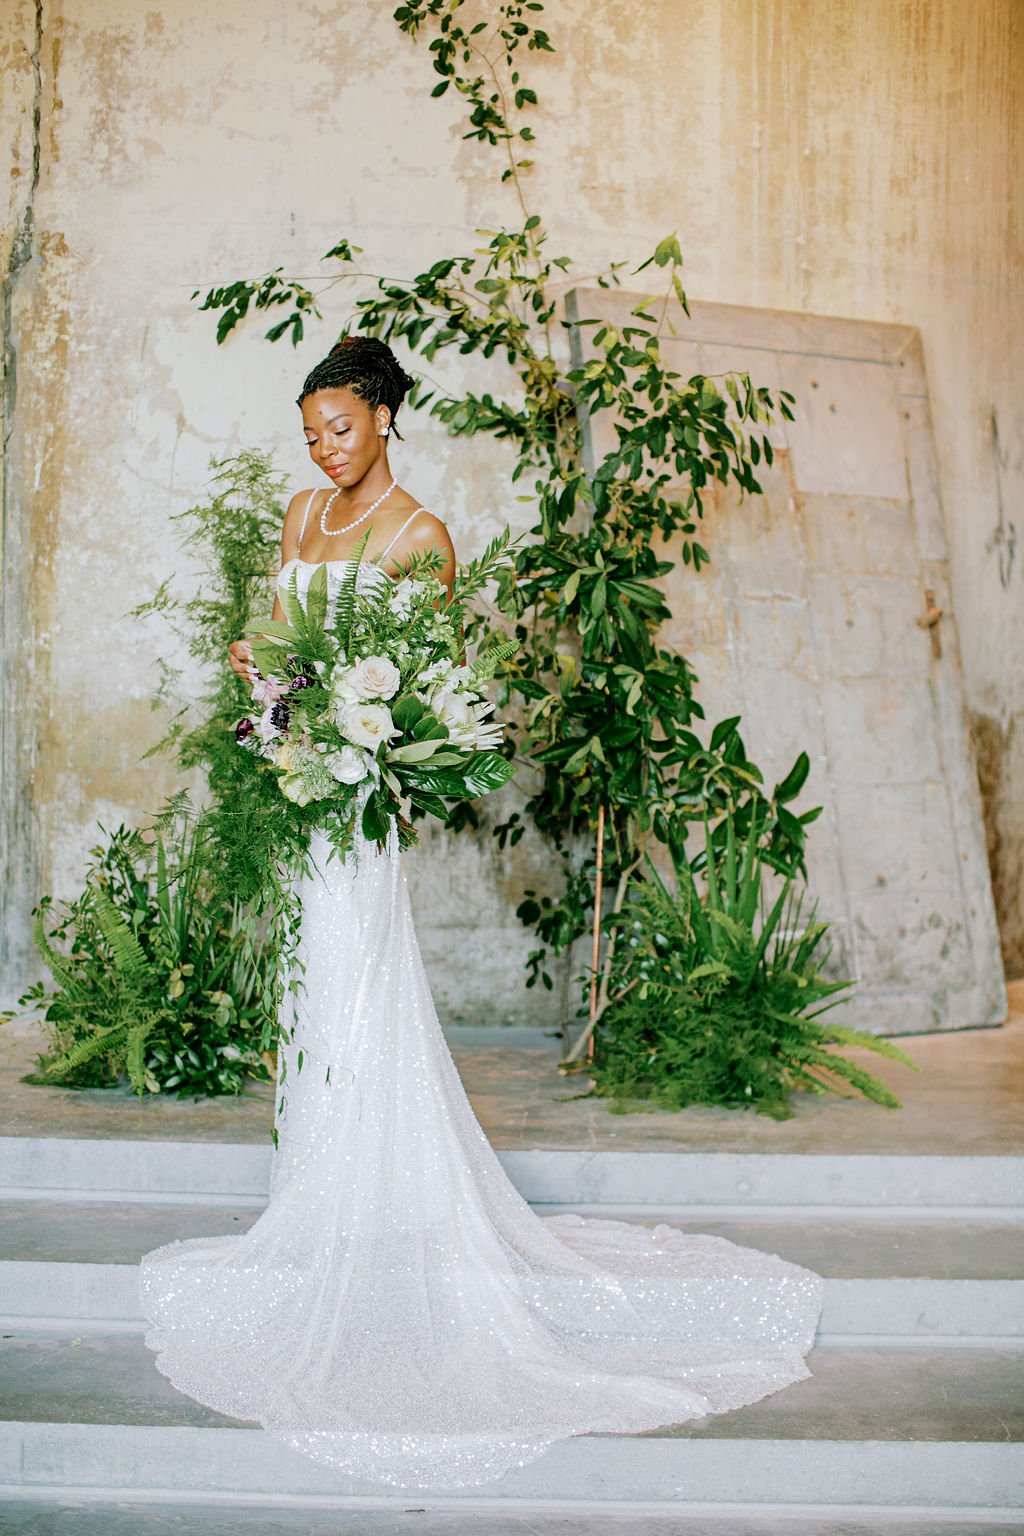 5-things-to-know-before-booking-your-wedding-florist-brought-to-you-by-savannah-wedding-planner-and-savannah-florist-ivory-and-beau-savannah-plant-riverside-district-savannah-wedding-savannah-bridal-shop-maggie-sottero-made-wiith-love-bridal-35.jpg